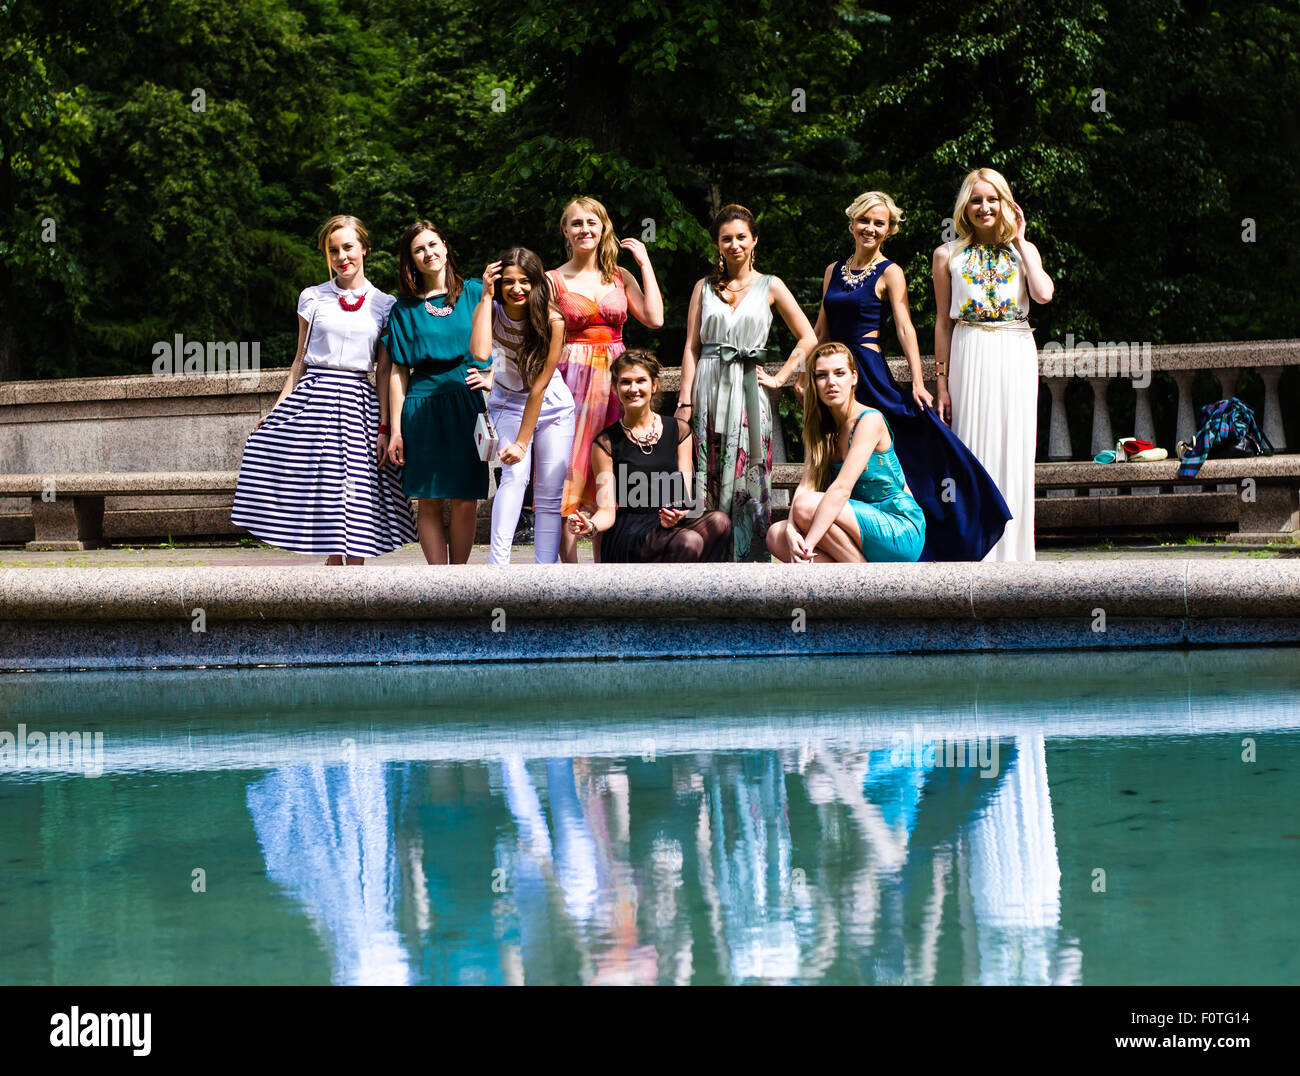 A big group of girls (females) posing in a front of a camera before prom ceremony Stock Photo